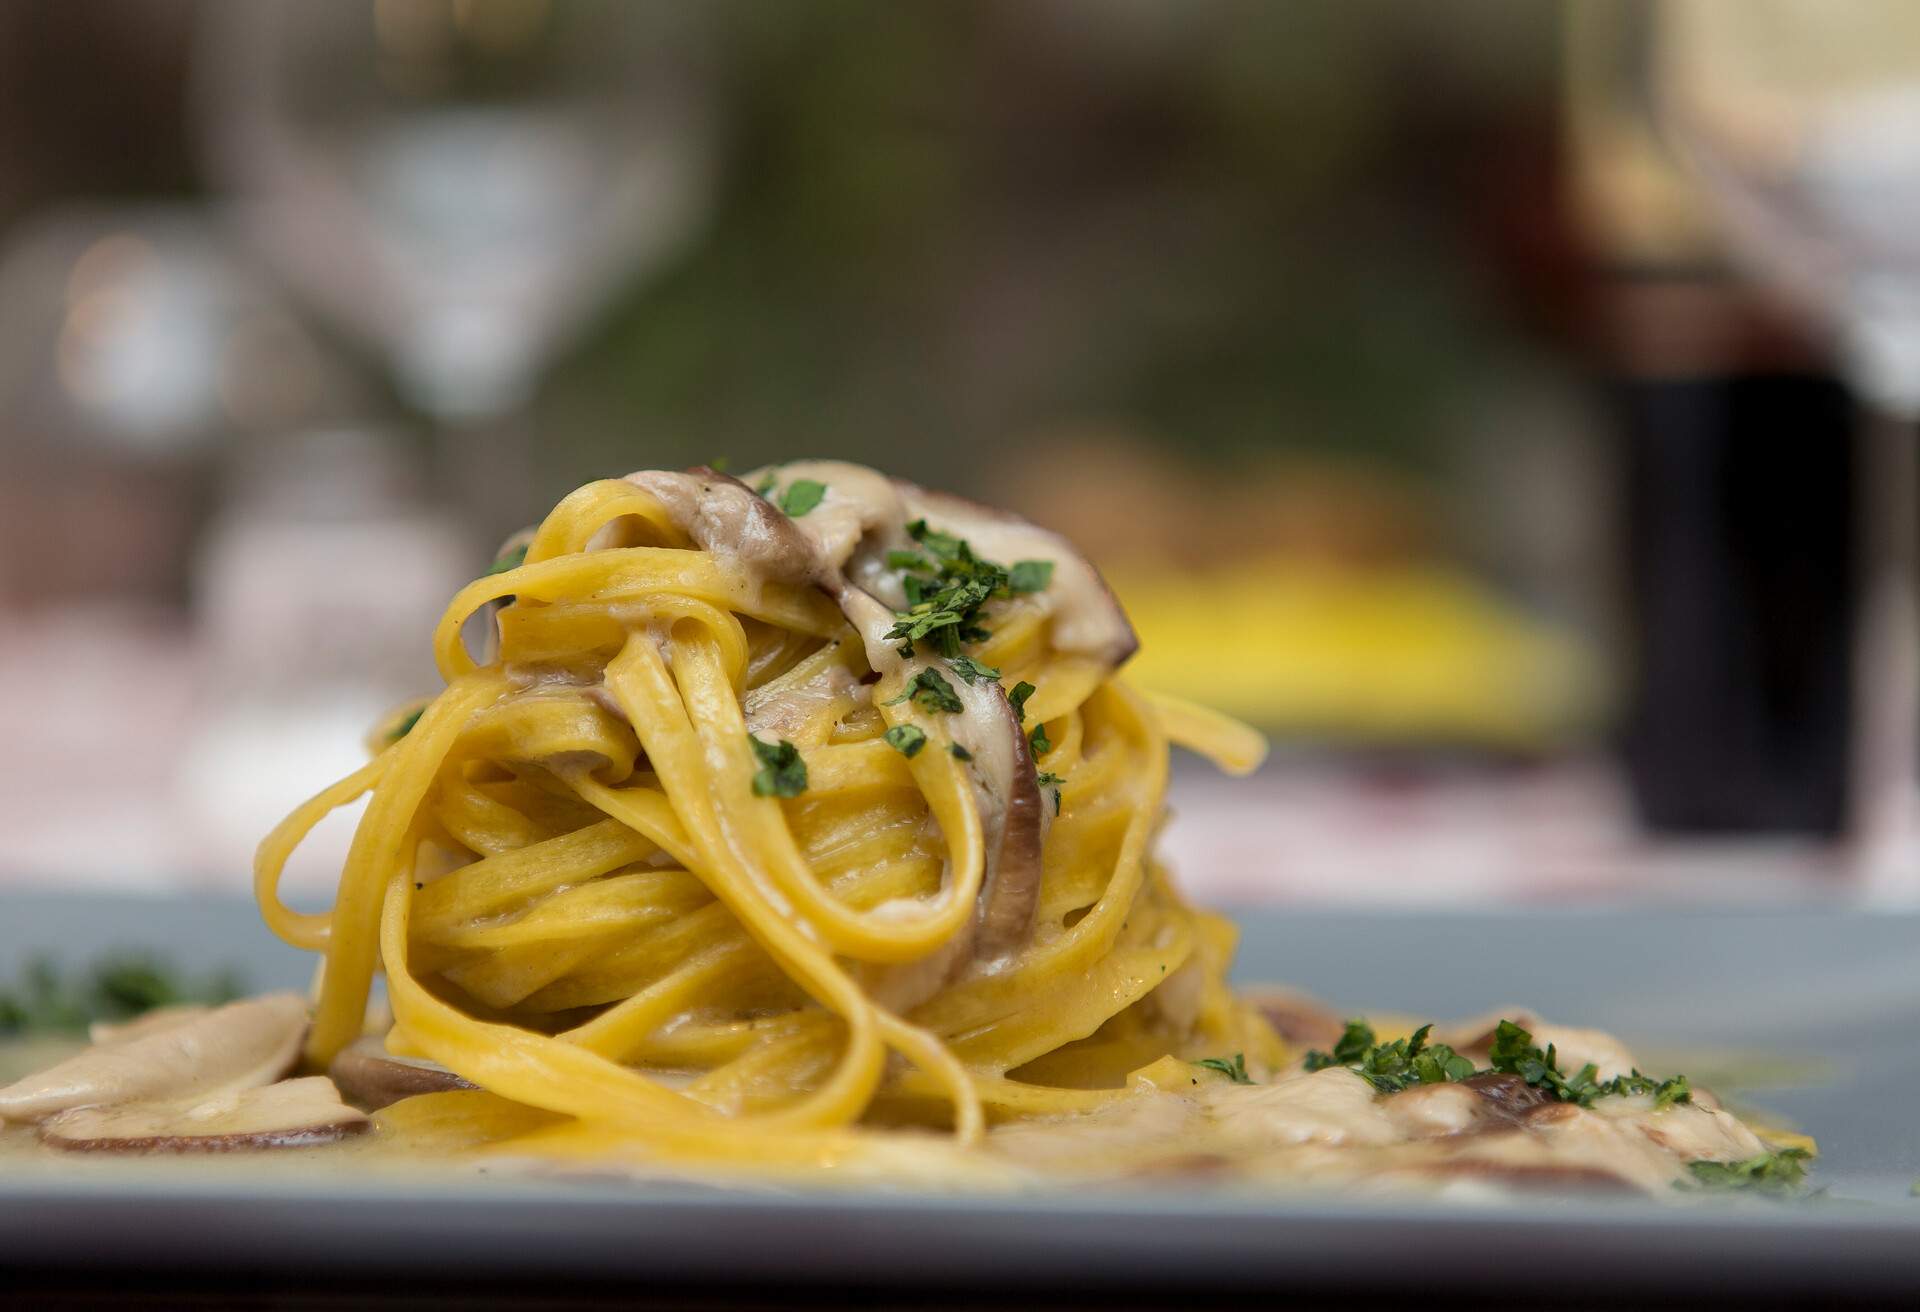 Close up on a restaurant table with a dish of italian pasta, tagliatelle with porcini mushrooms. Background is blurred, no people are visible in the frame.